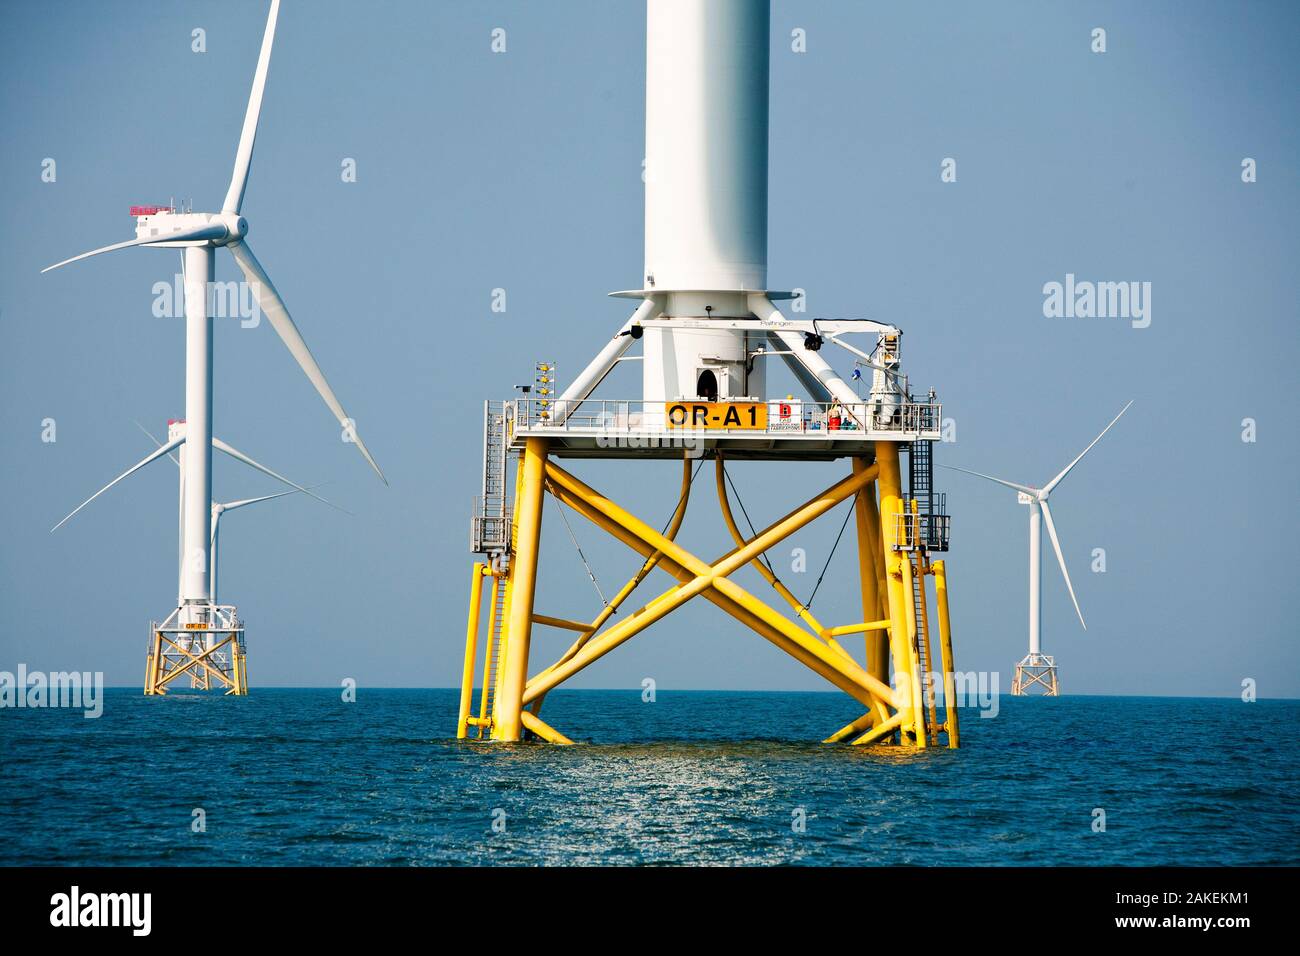 The Ormonde Offshore Wind Farm, Barrow-In-Furness, Cumbria, England, UK. September 2011 Stock Photo